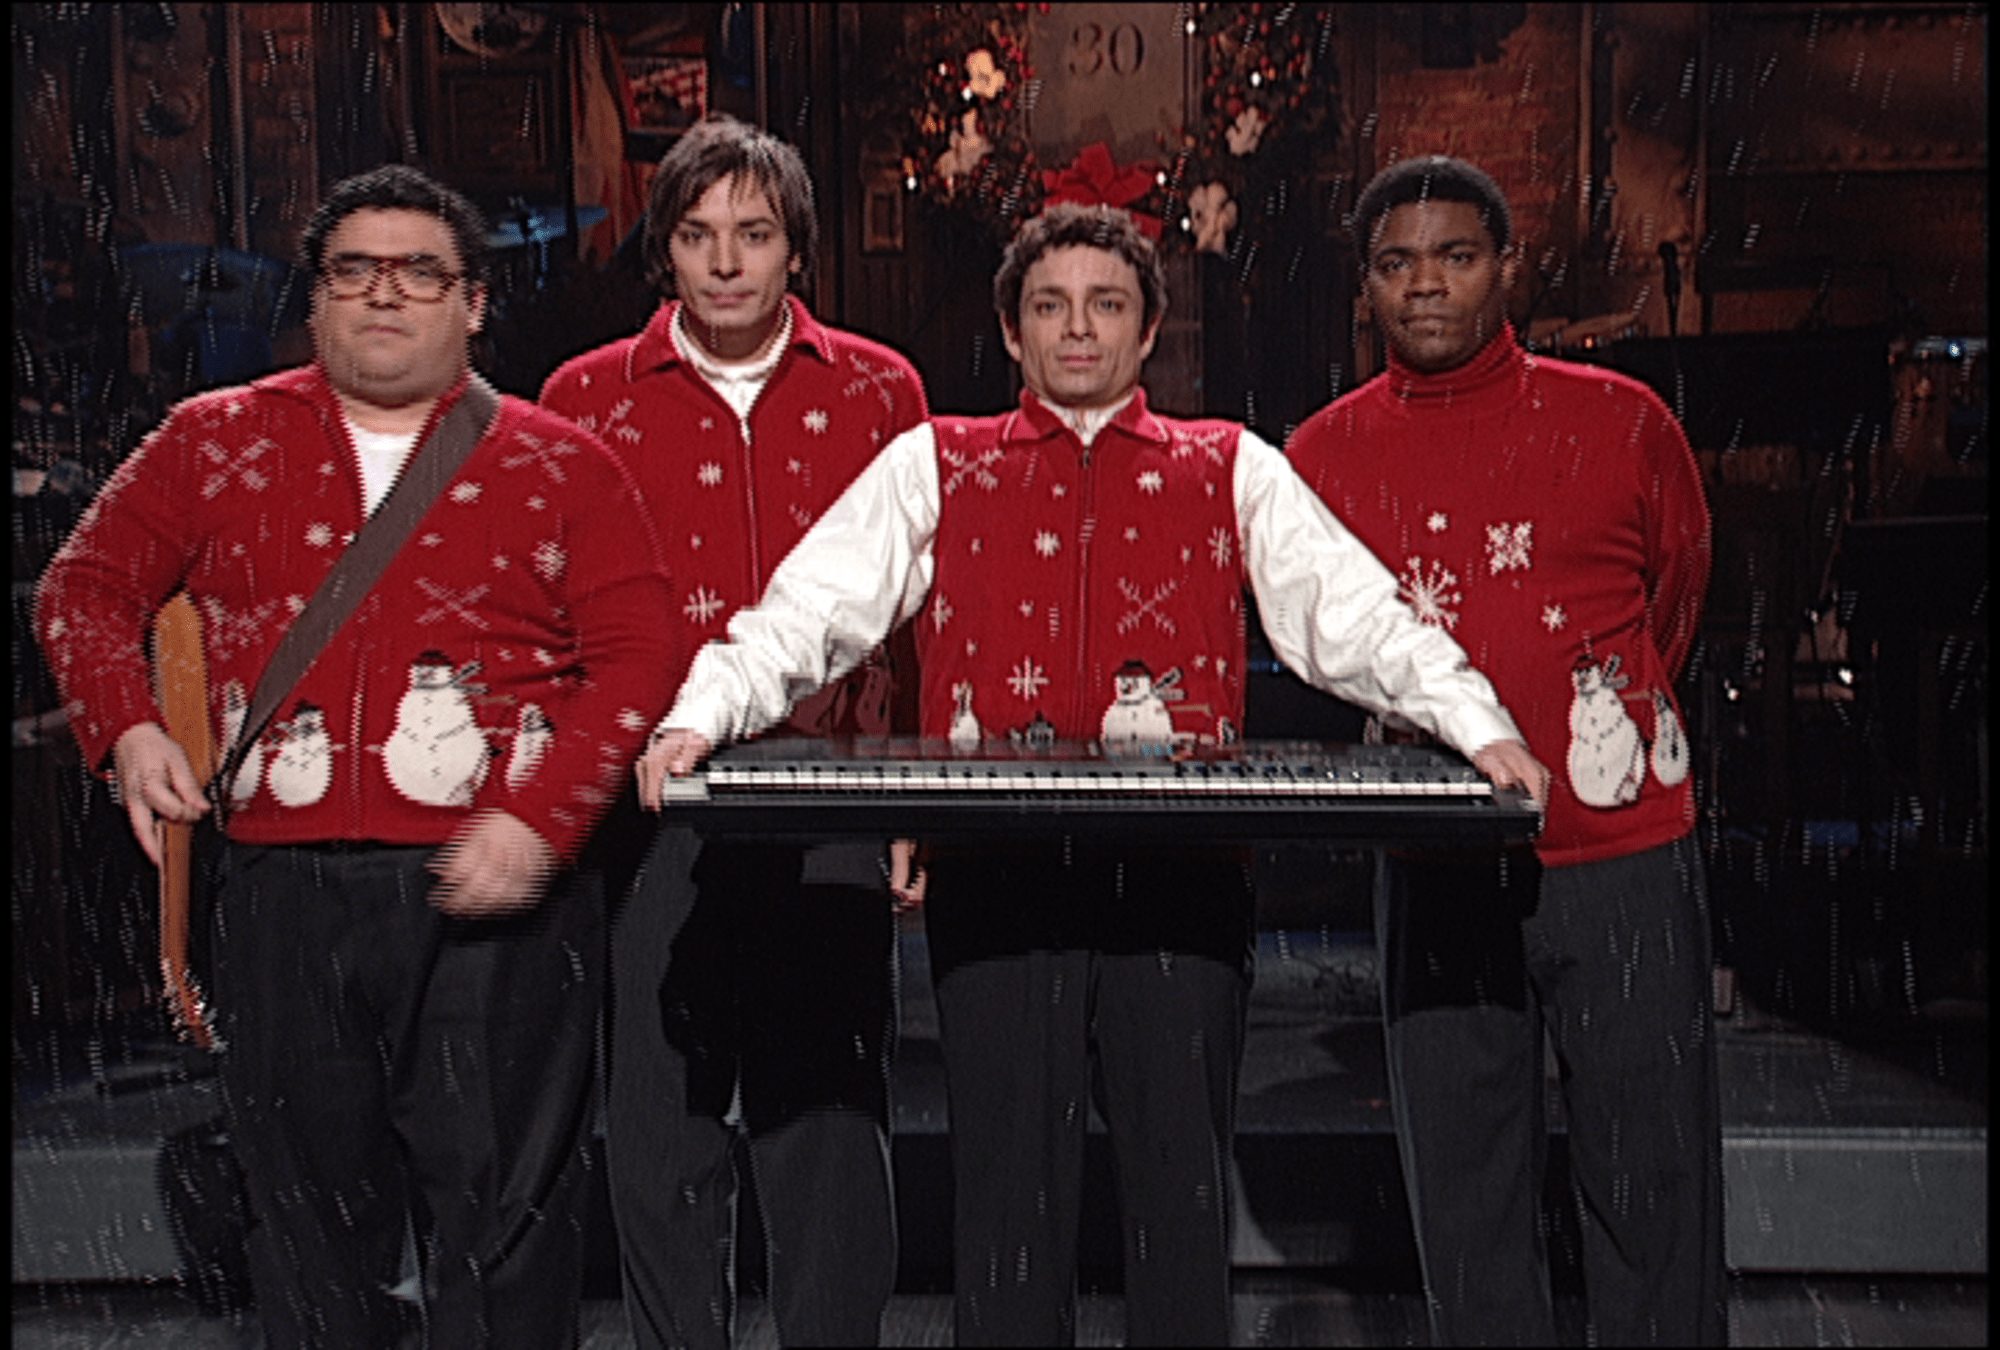 The 15 best Christmas Sketches from SNL